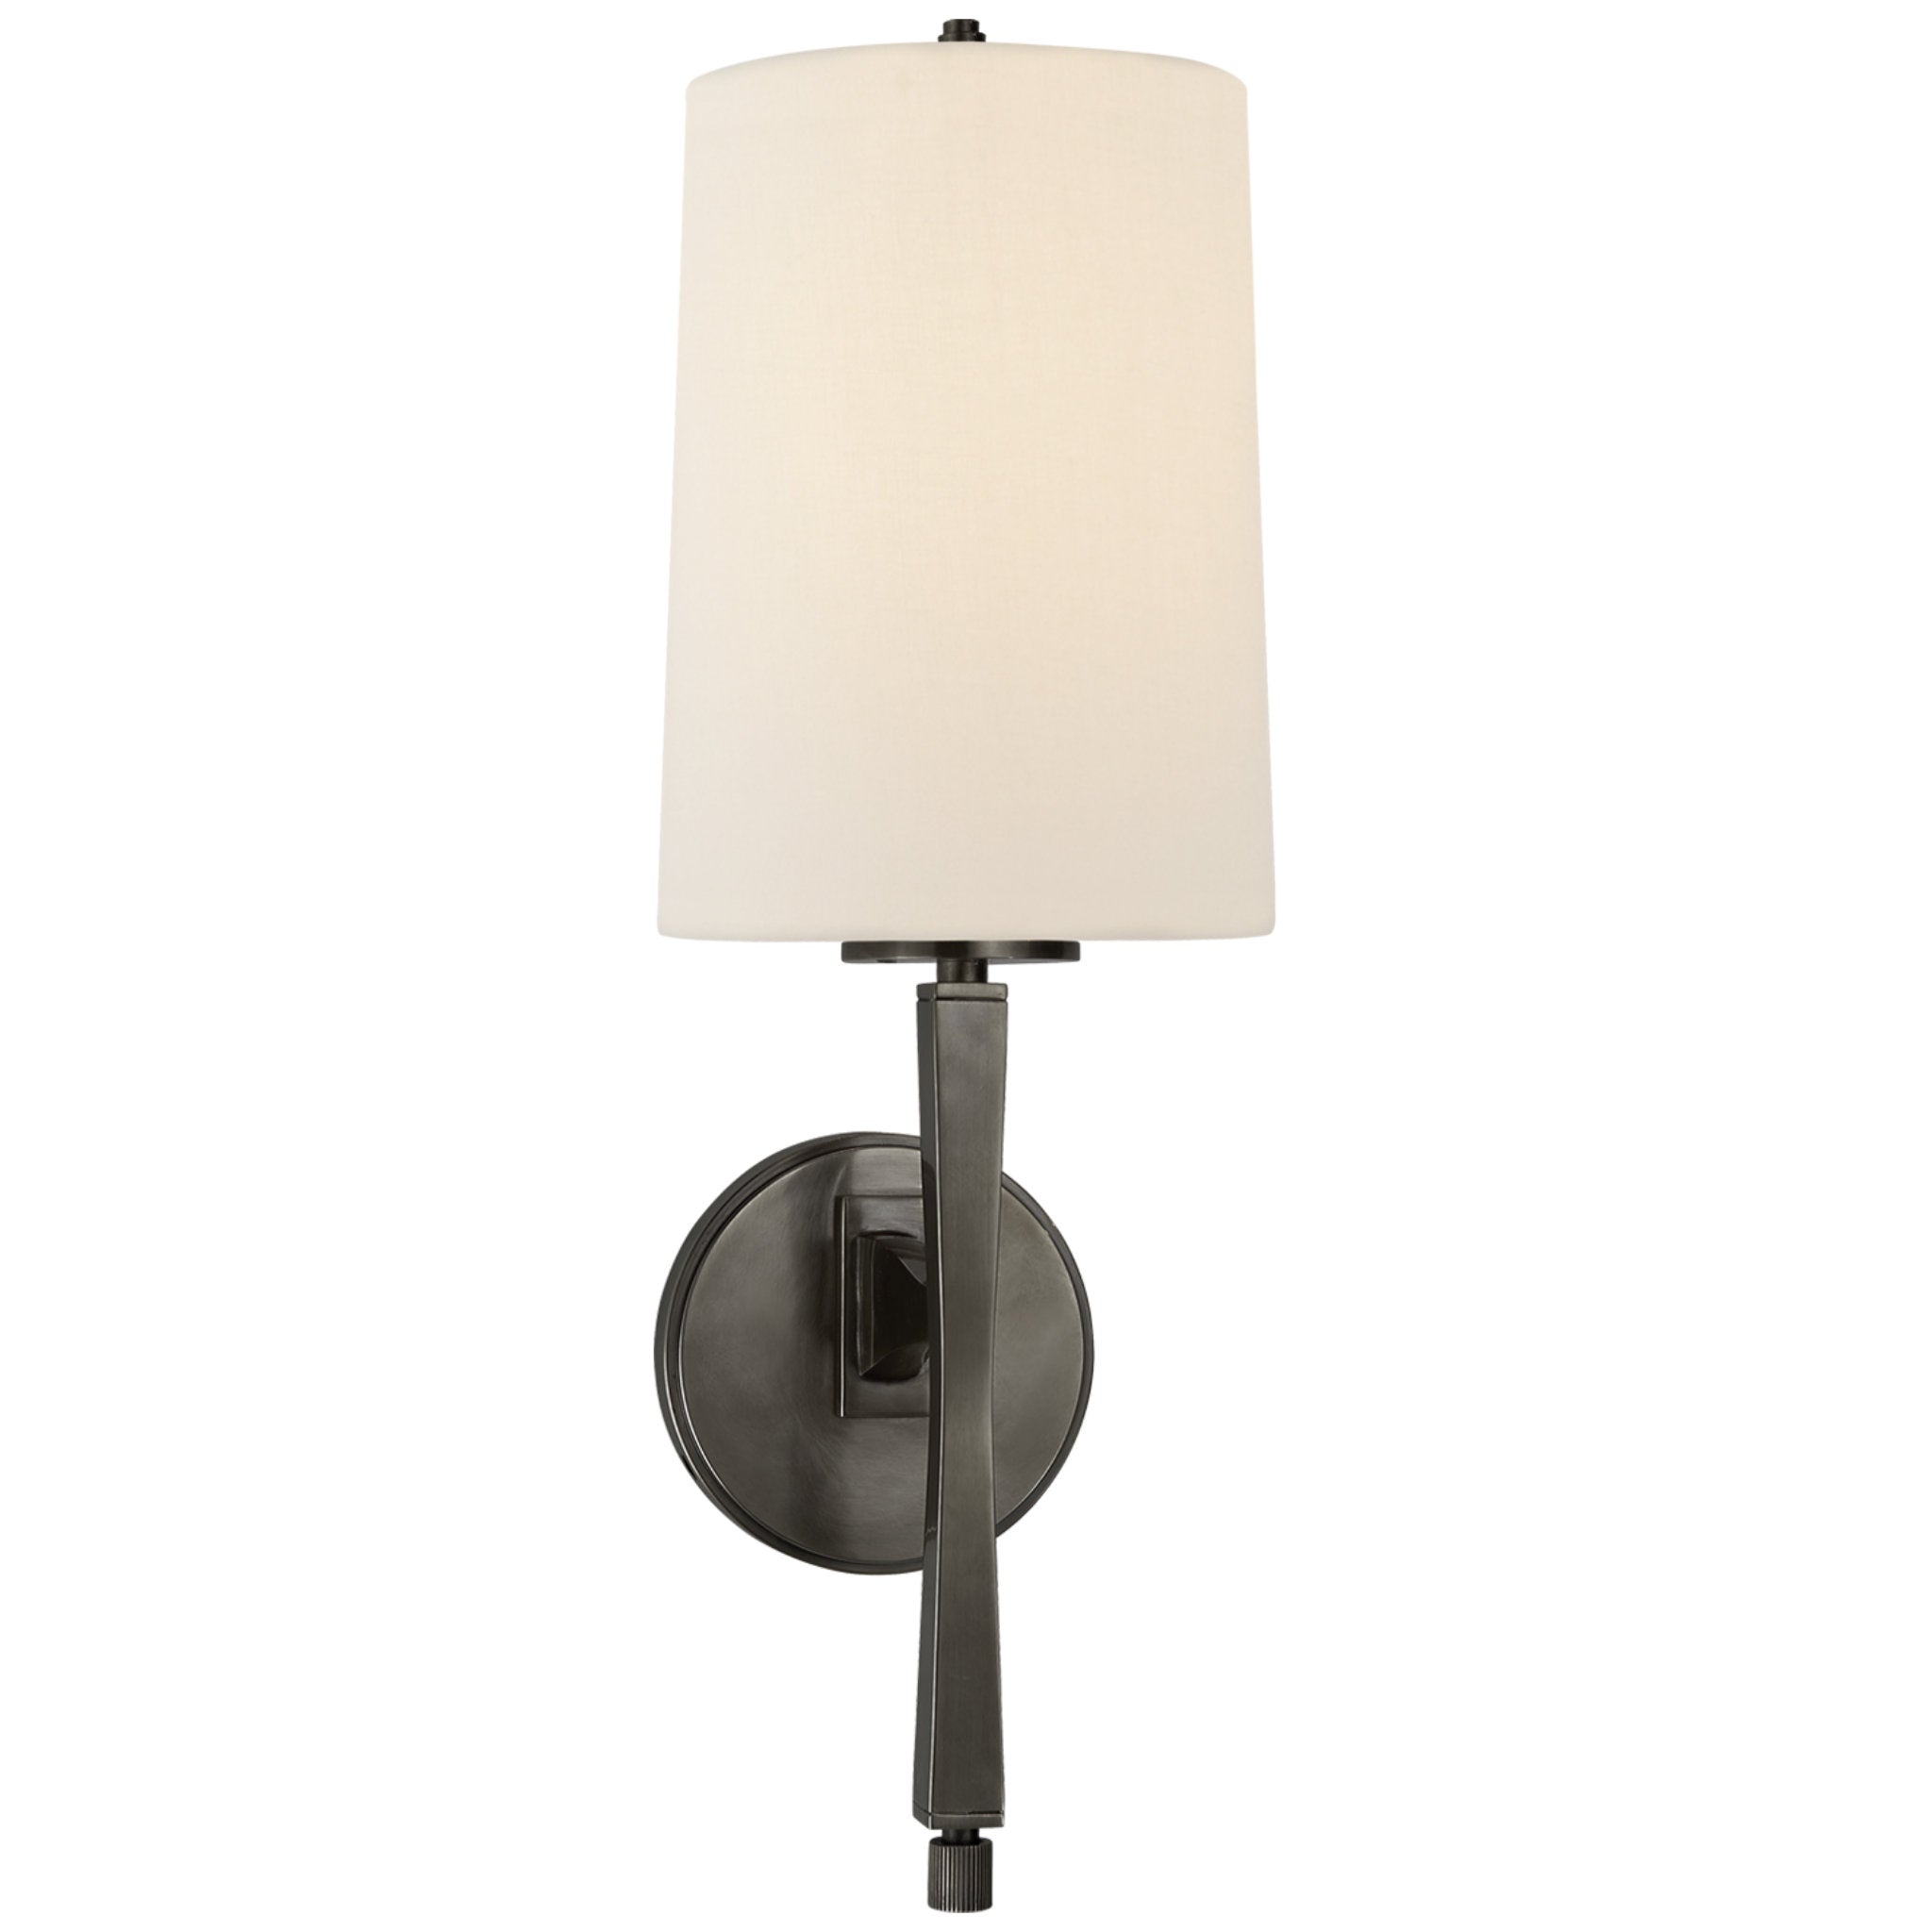 Thomas O'Brien Edie Sconce in Bronze with Linen Shade